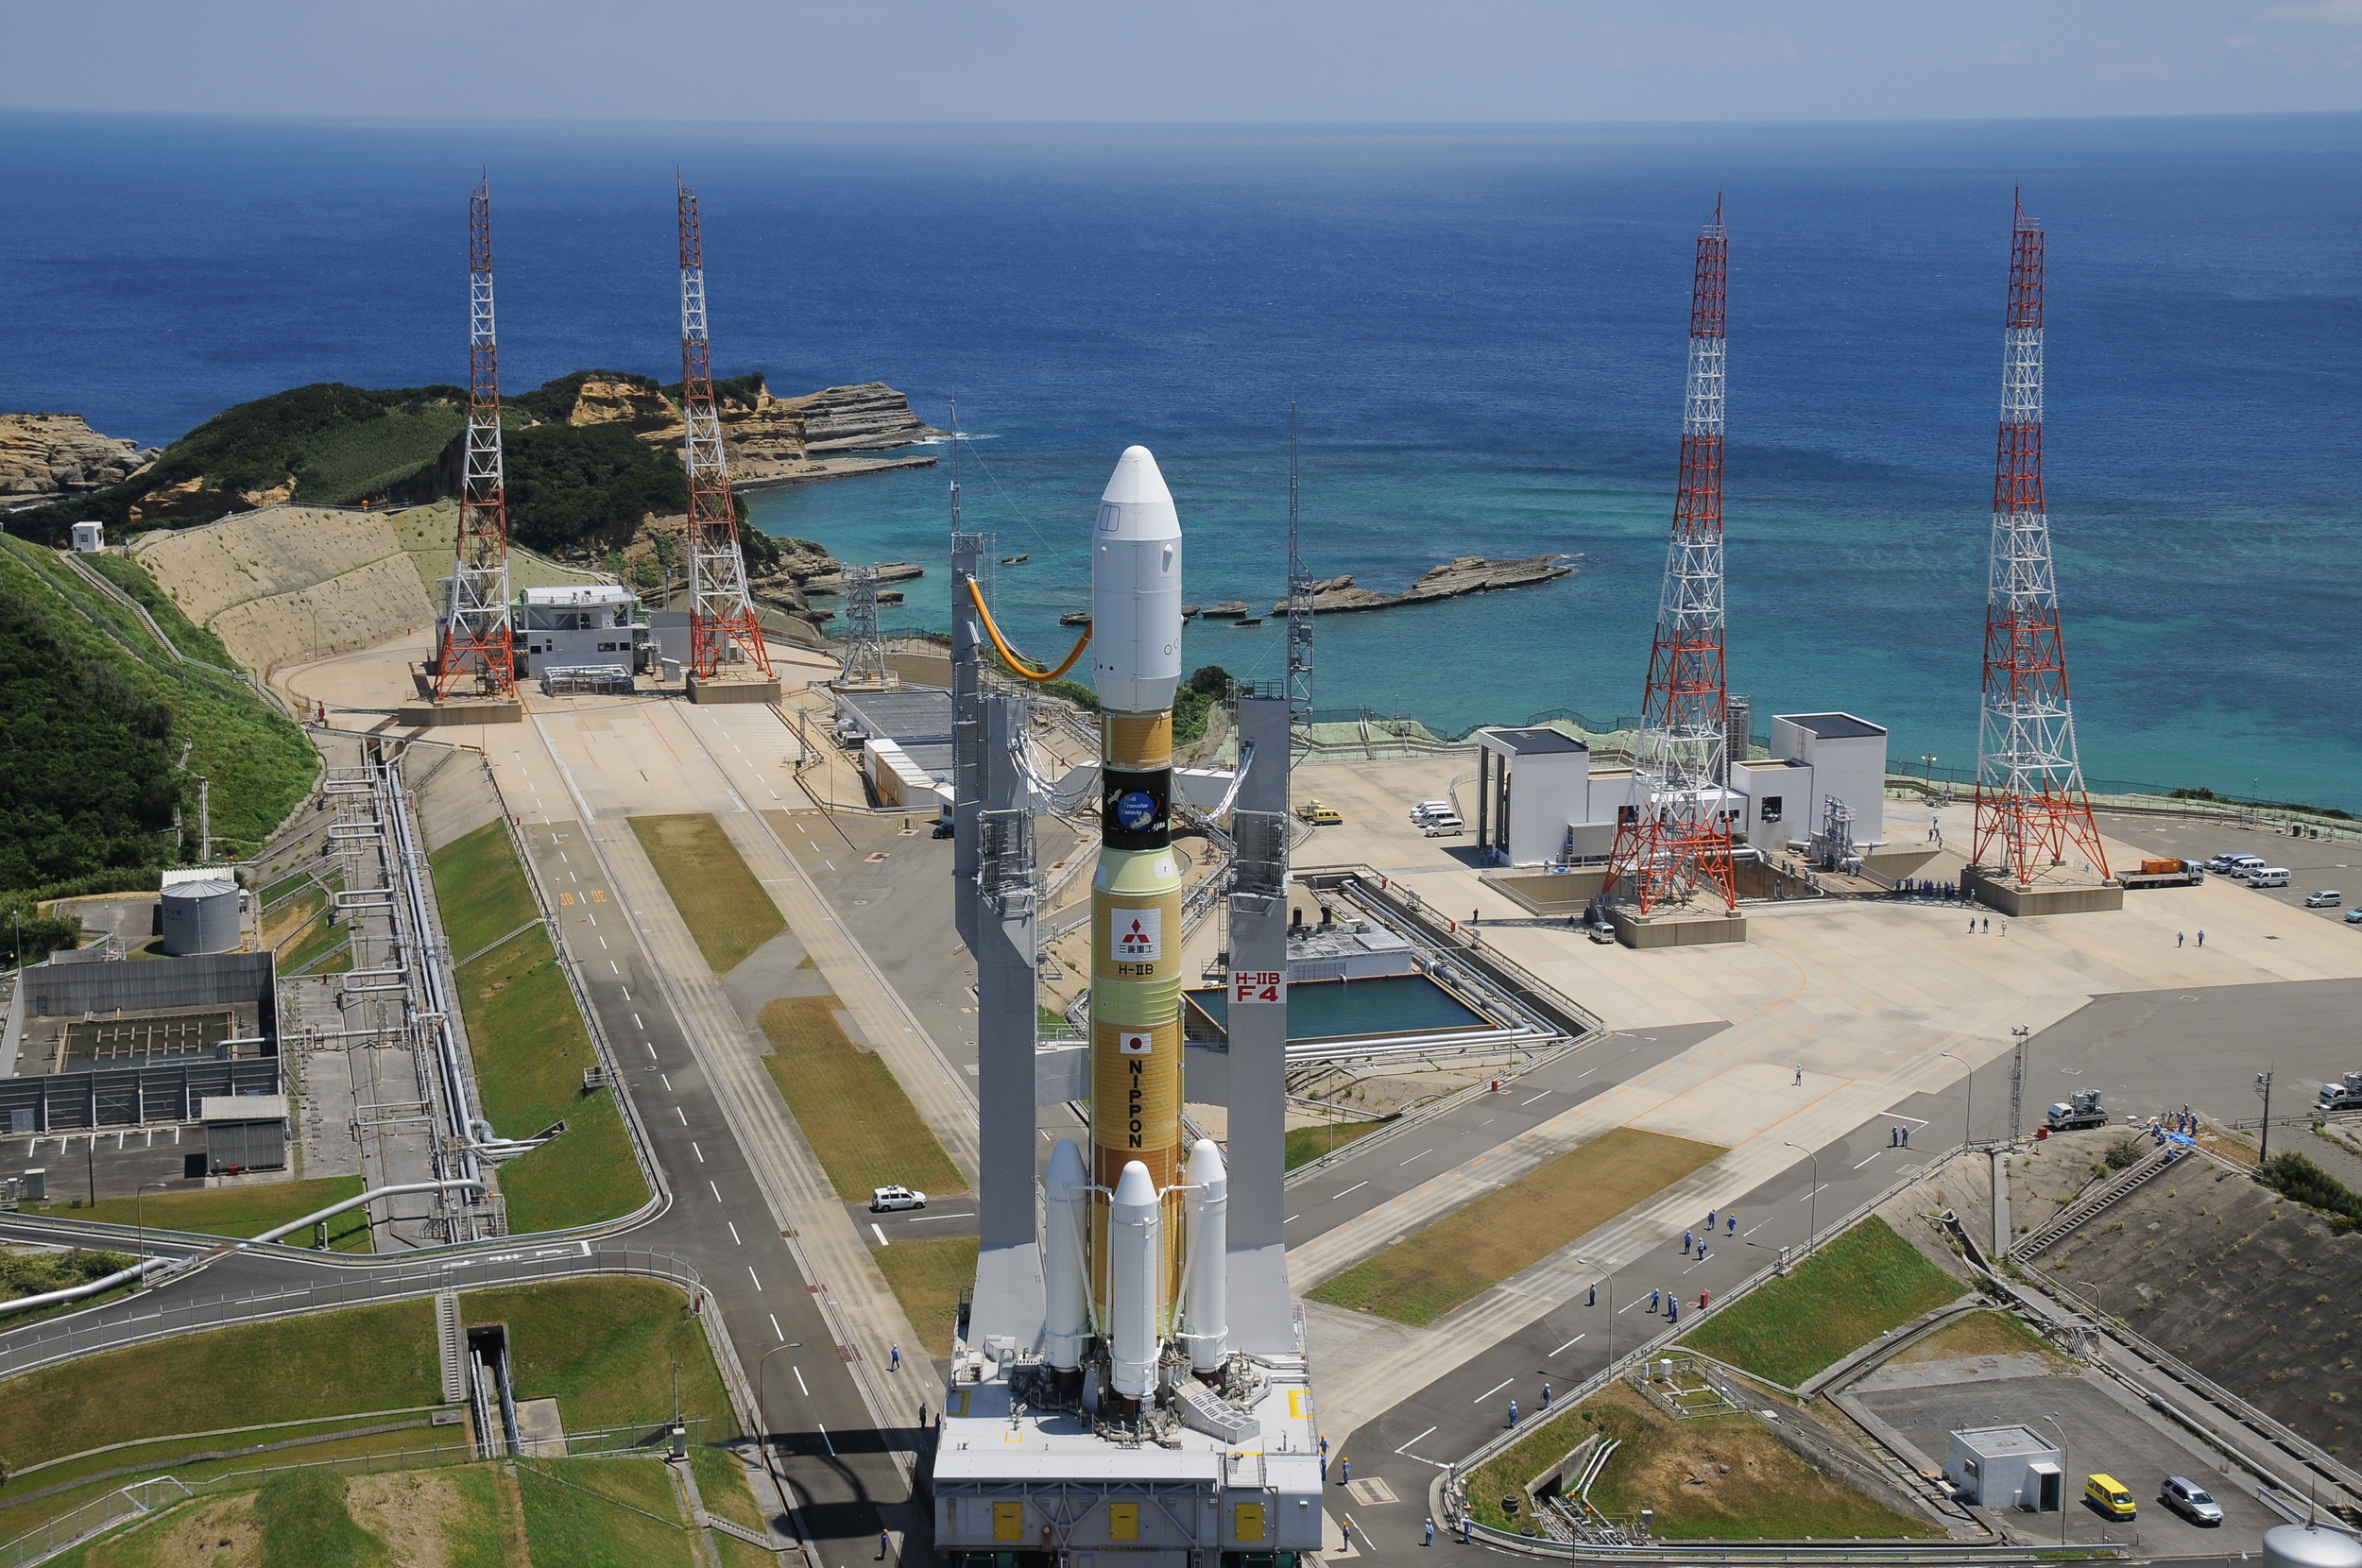  An H-IIB rocket with a Kounatori inside the payload faring is being rolled out to Launch Pad 2 at the Tanegashima Space Center. Photo Credit: JAXA 